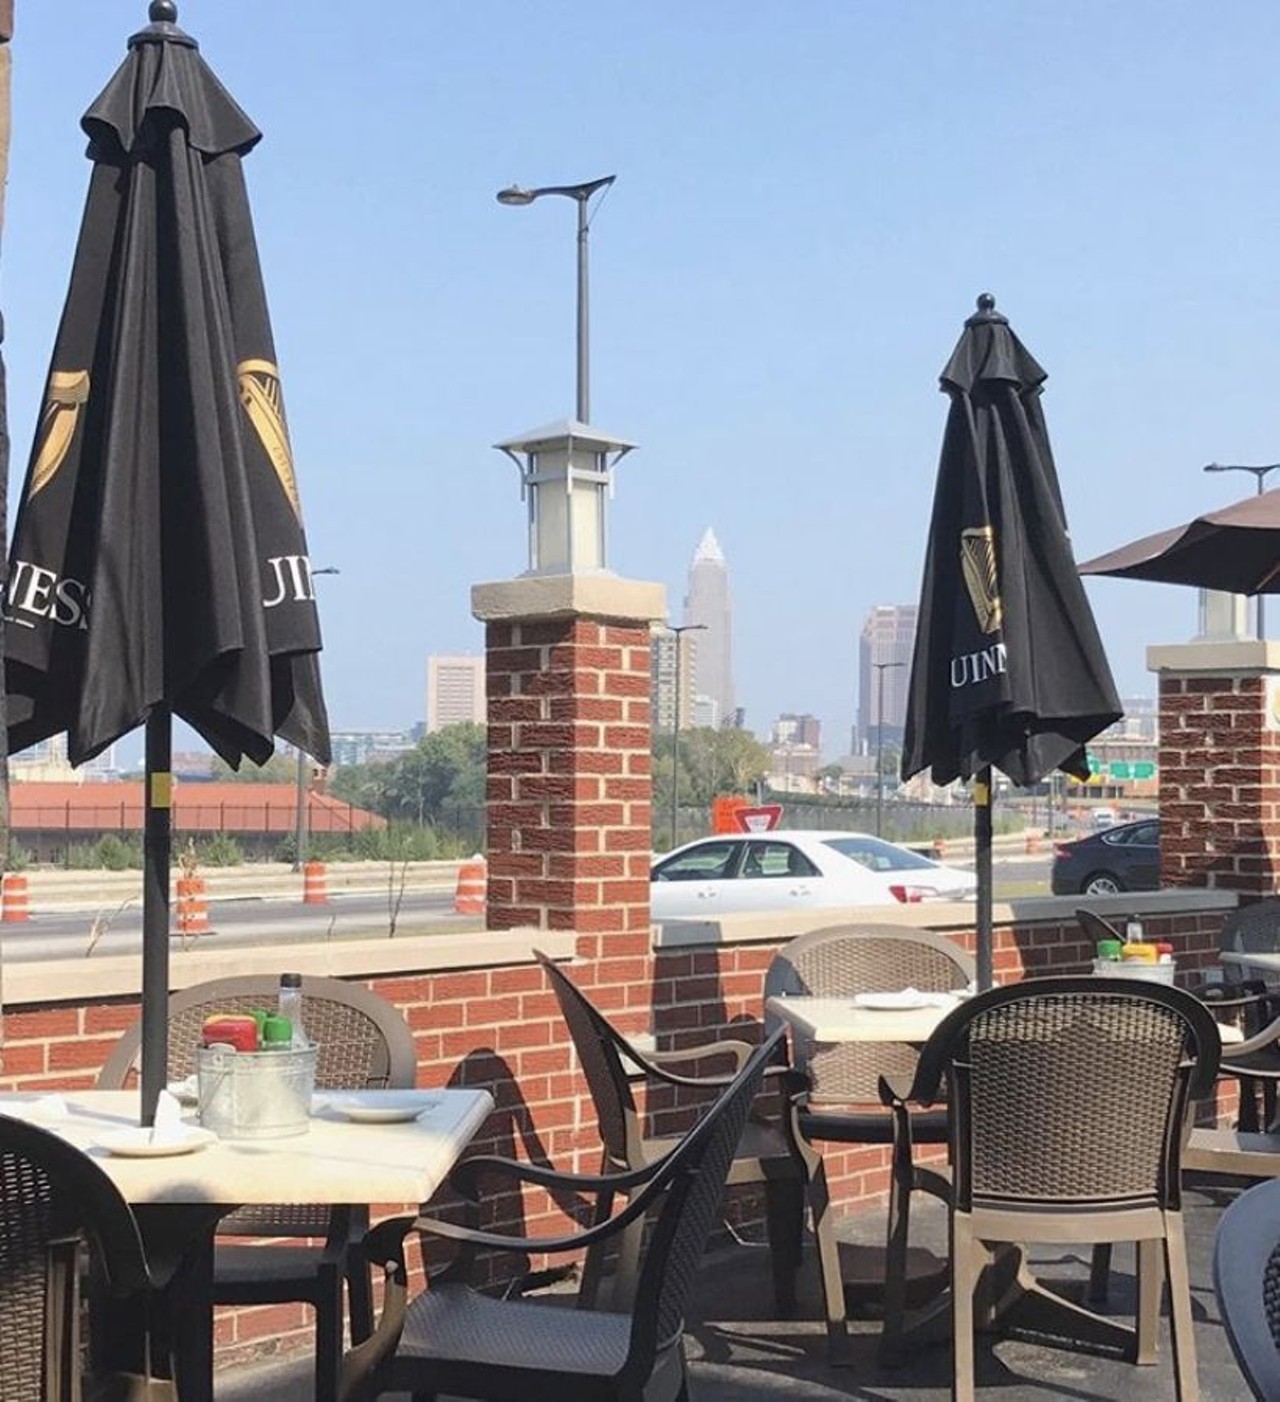 The Harp
4408 Detroit Ave., Cleveland
This Ohio City eatery is known for its take on traditional Irish dishes, its extensive selection of drinks and its superior view of downtown.
Photo via babbsm58/Instagram